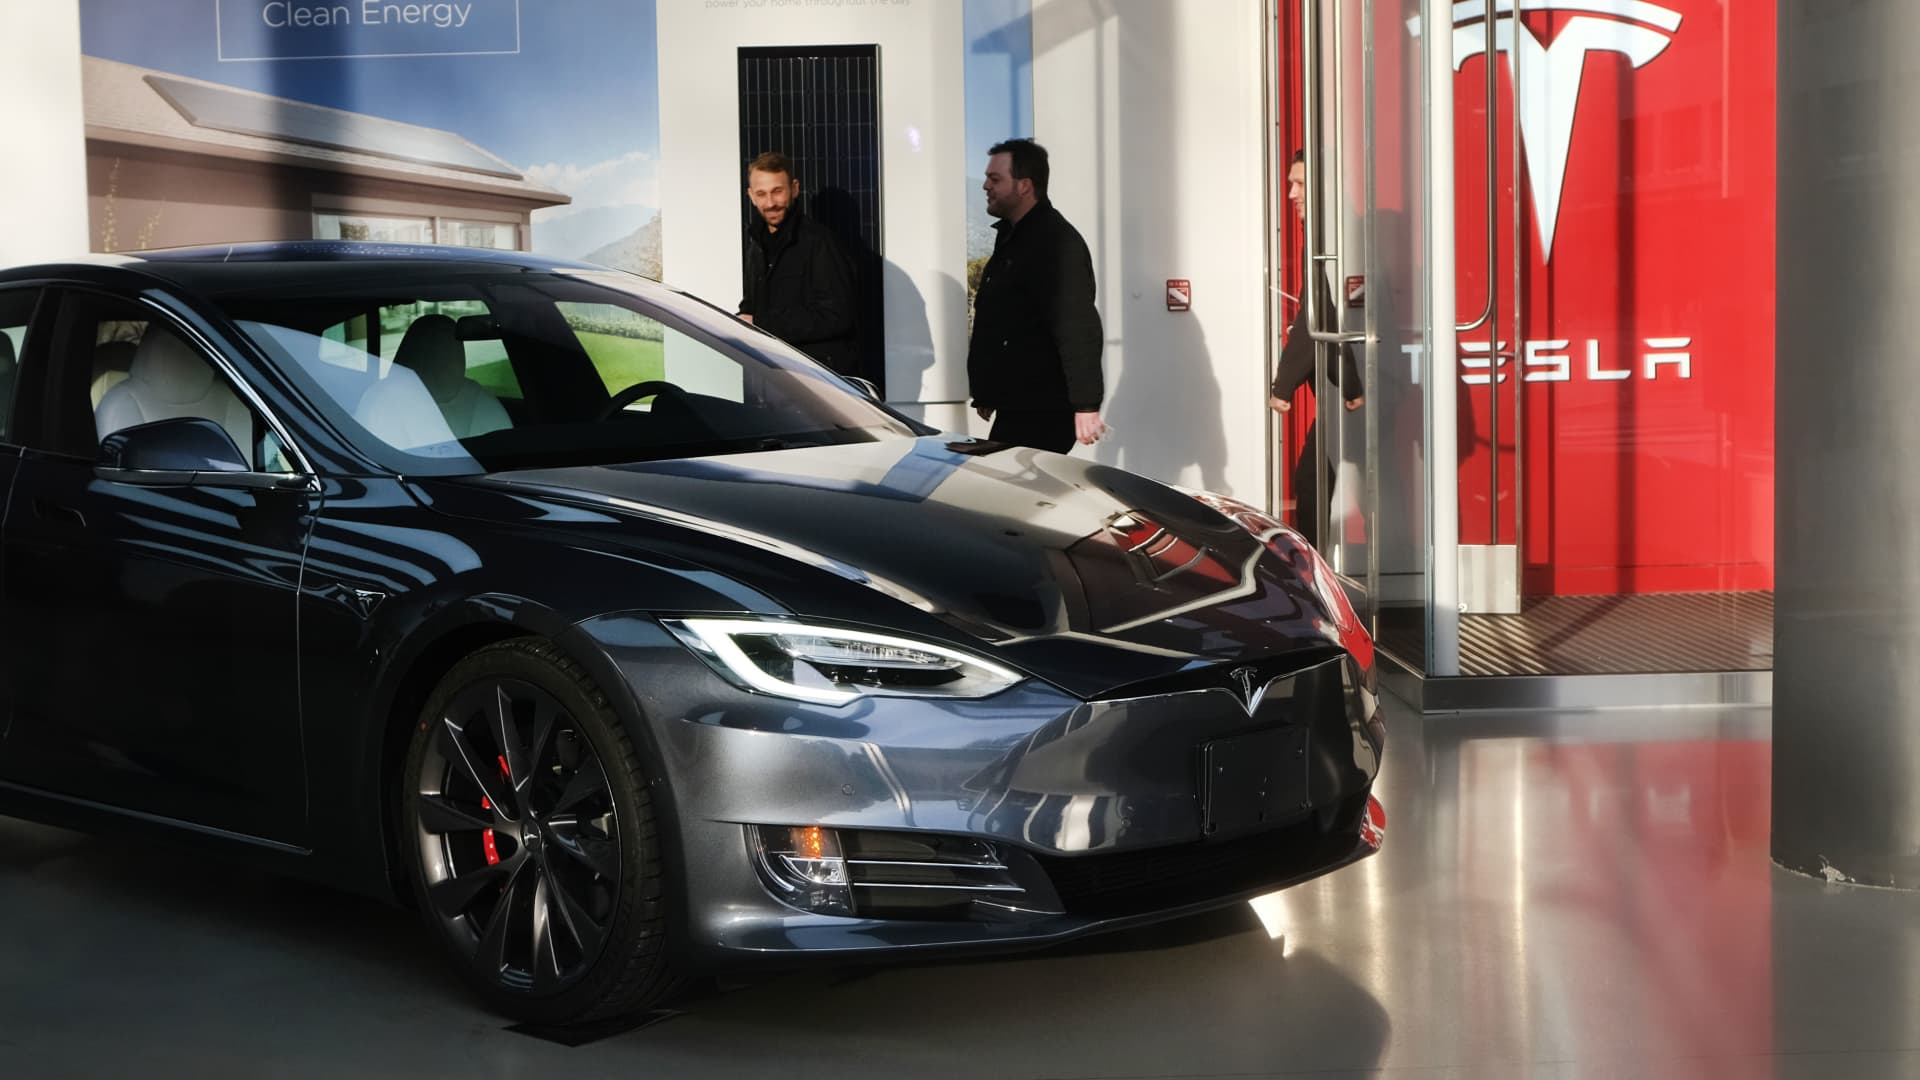 Tesla’s dominance of EVs is eroding as cheaper cars hit the market